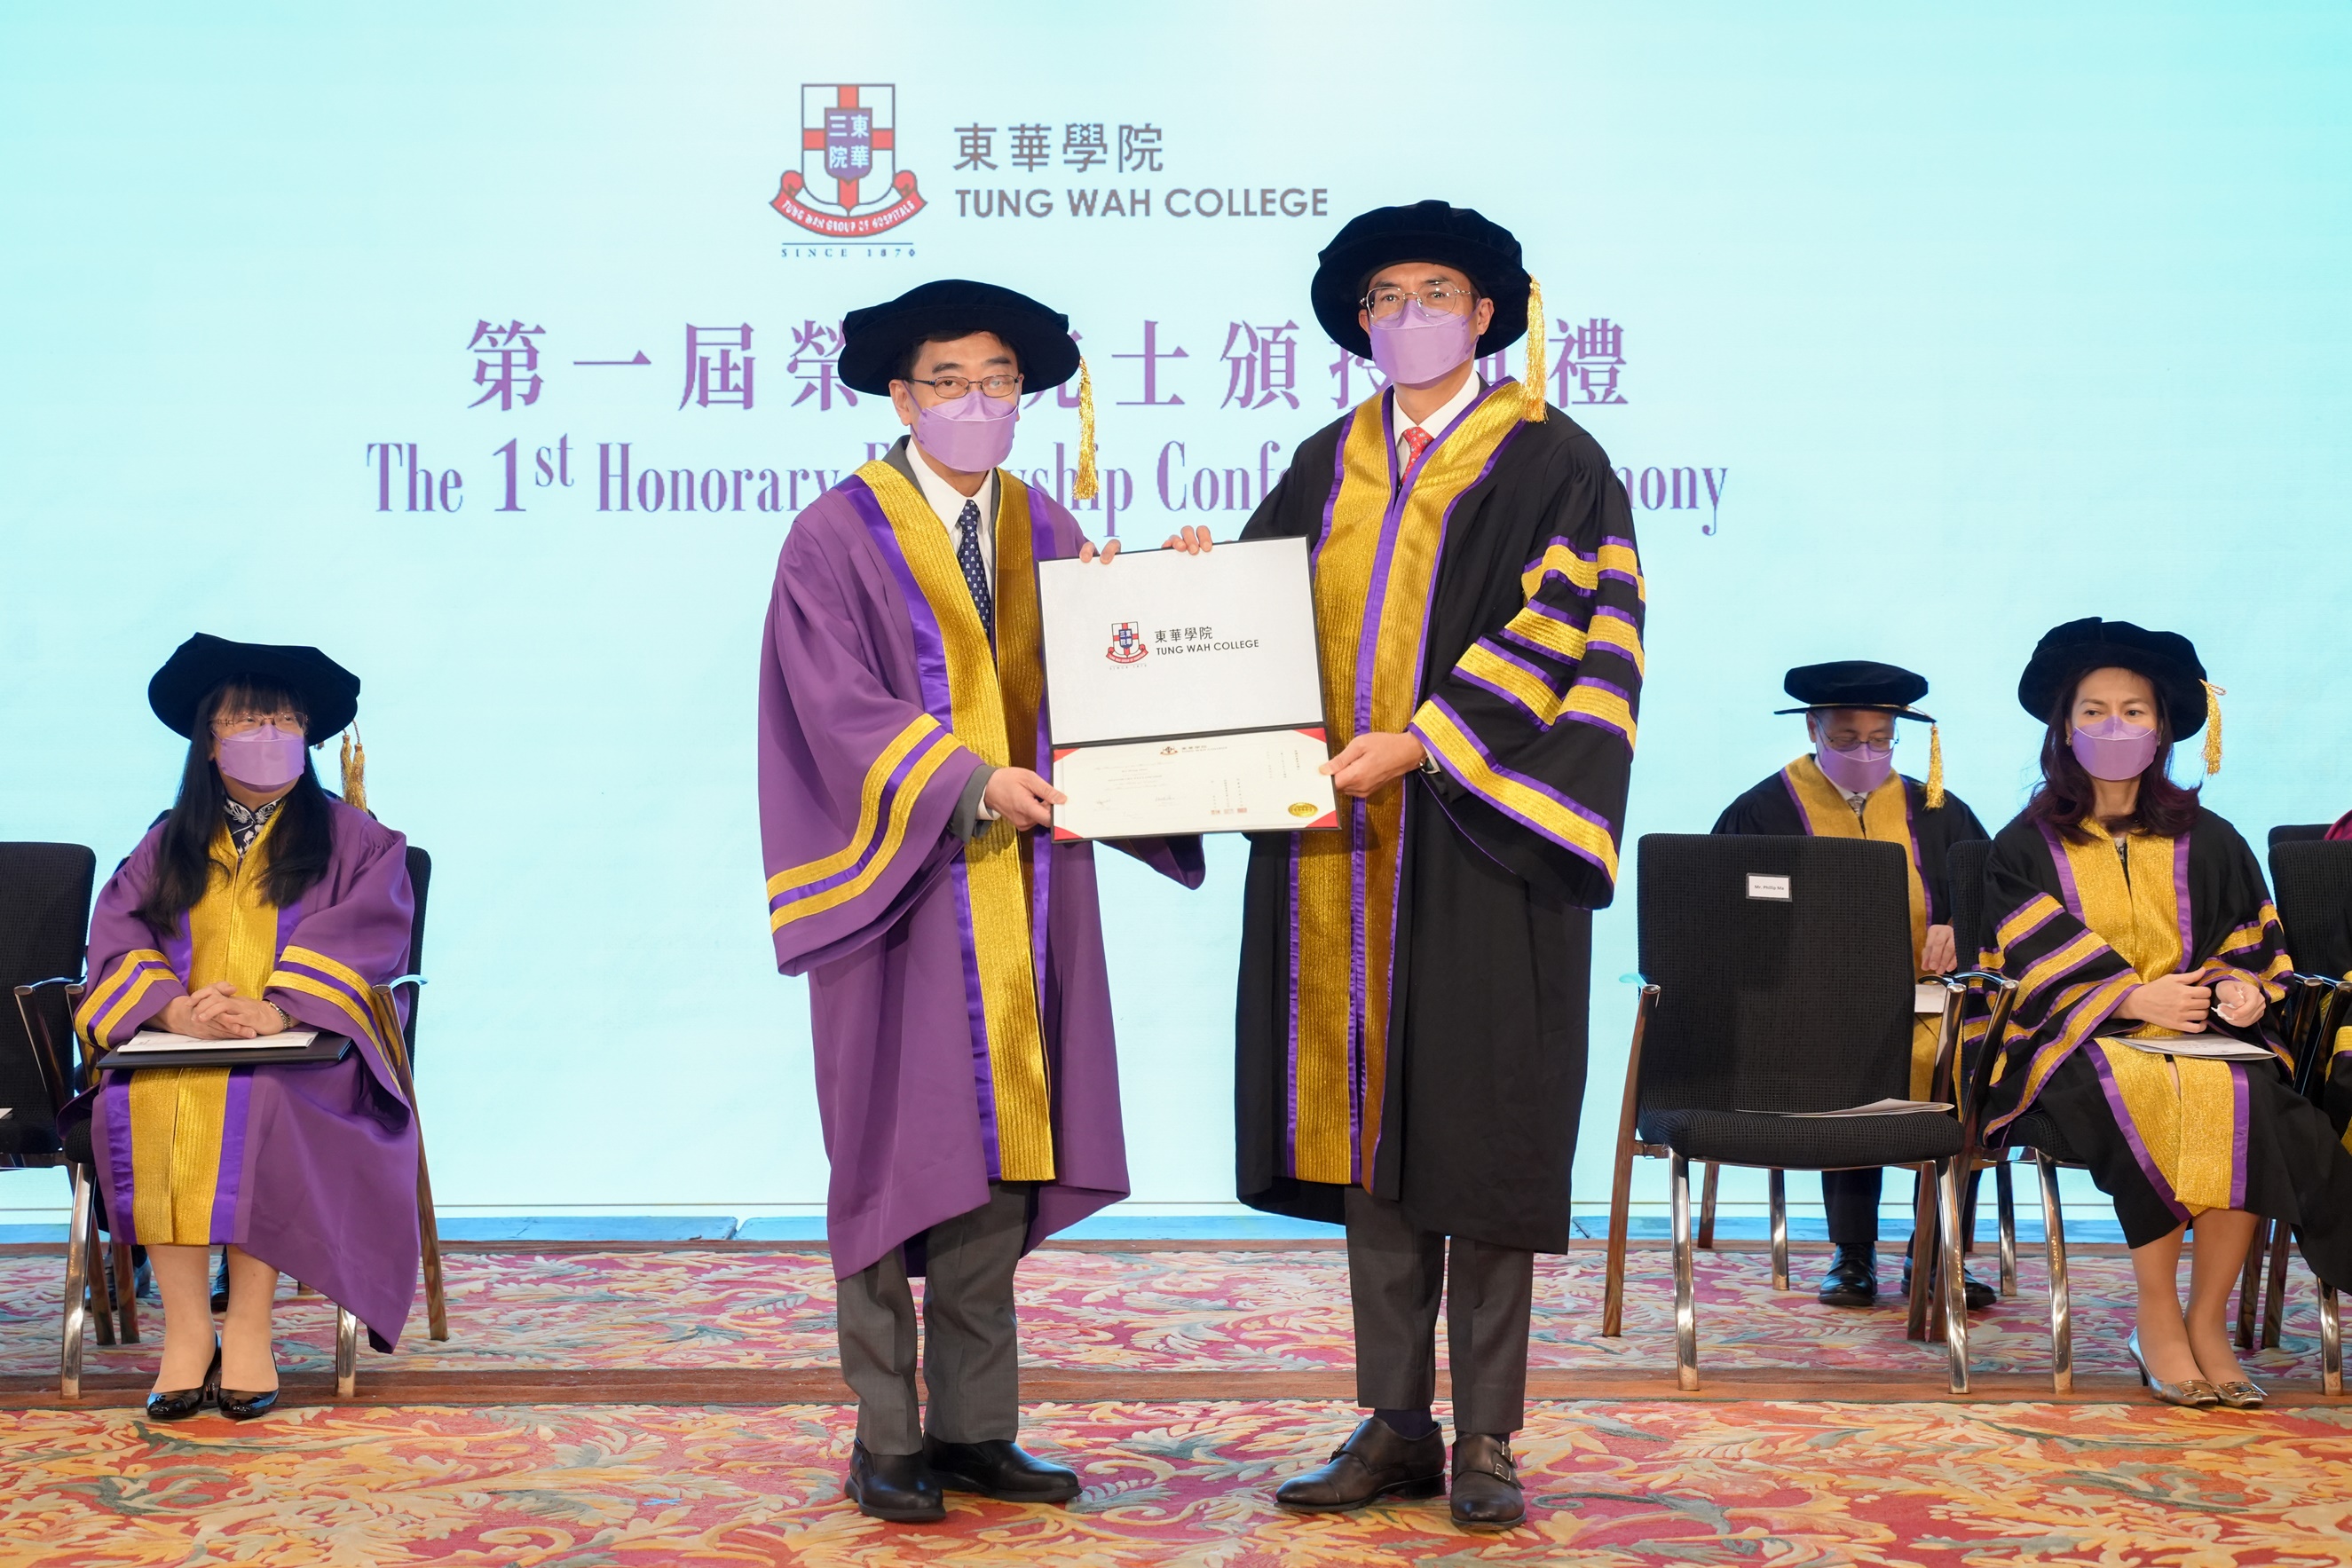 Dr. Ko Wing Man (left) is conferred the Honorary Fellowship.